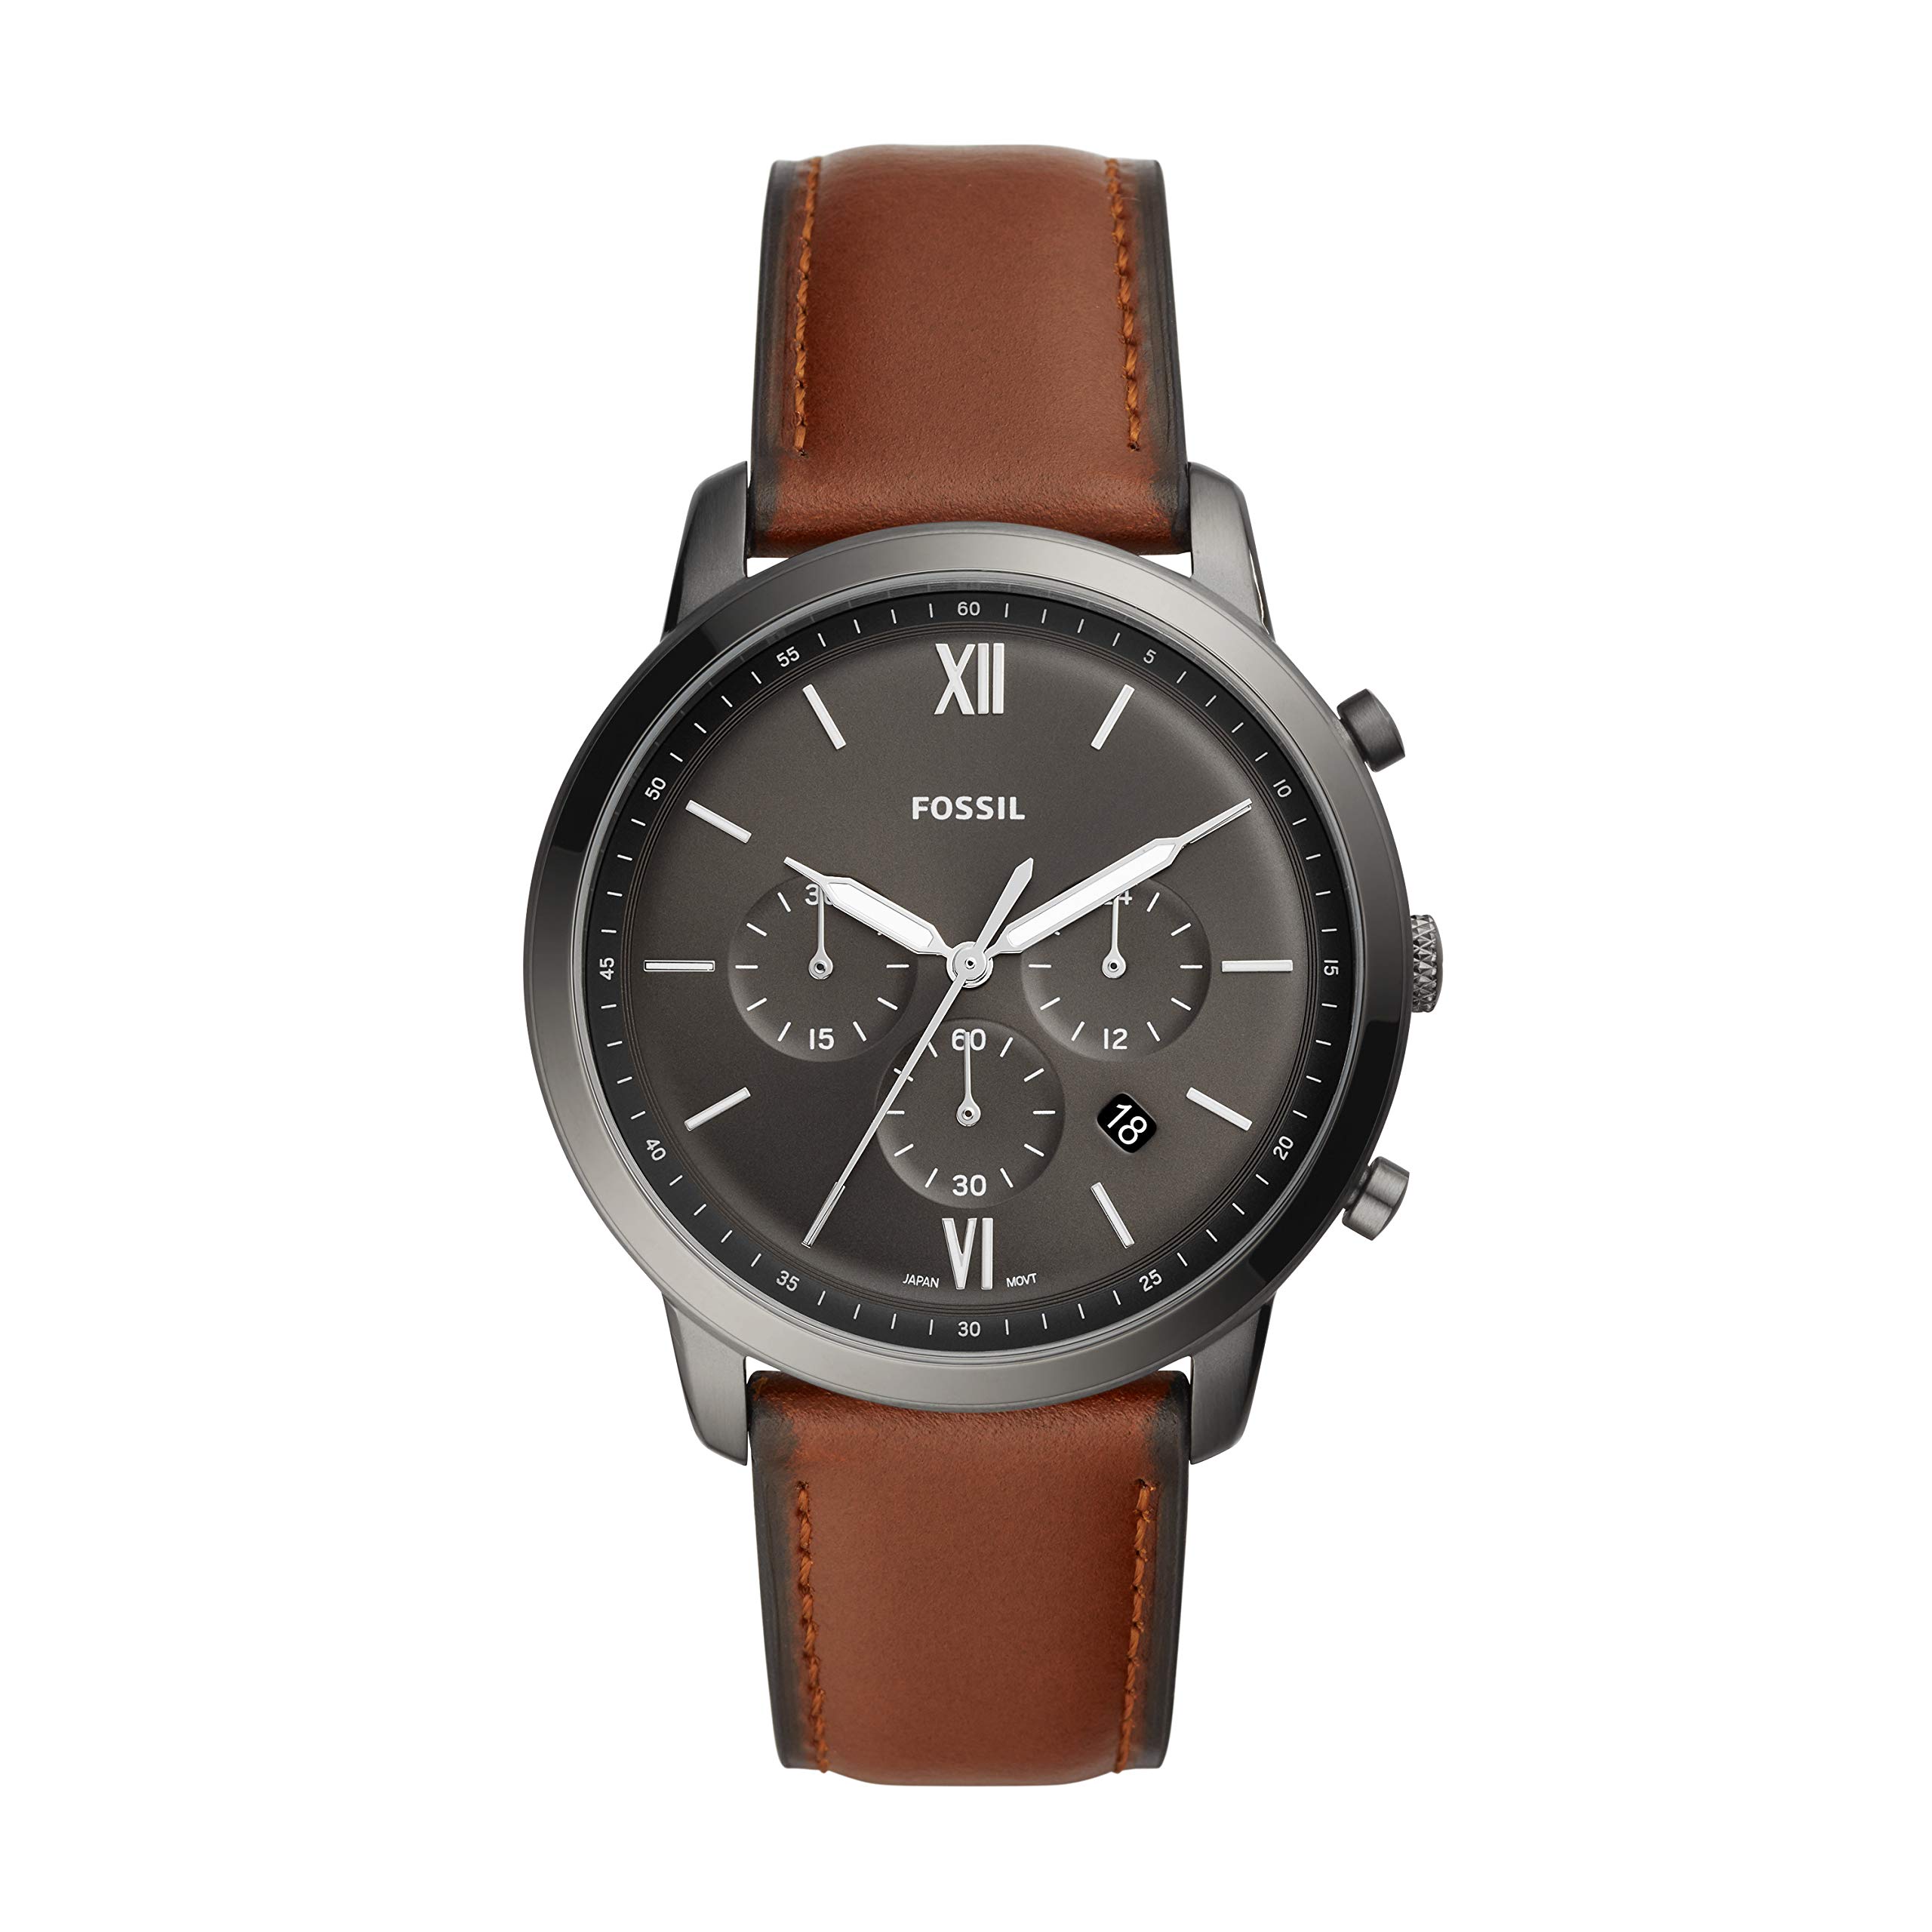 Fossil Neutra Men's Chronograph Watch with Stainless Steel Bracelet or Genuine Leather Band